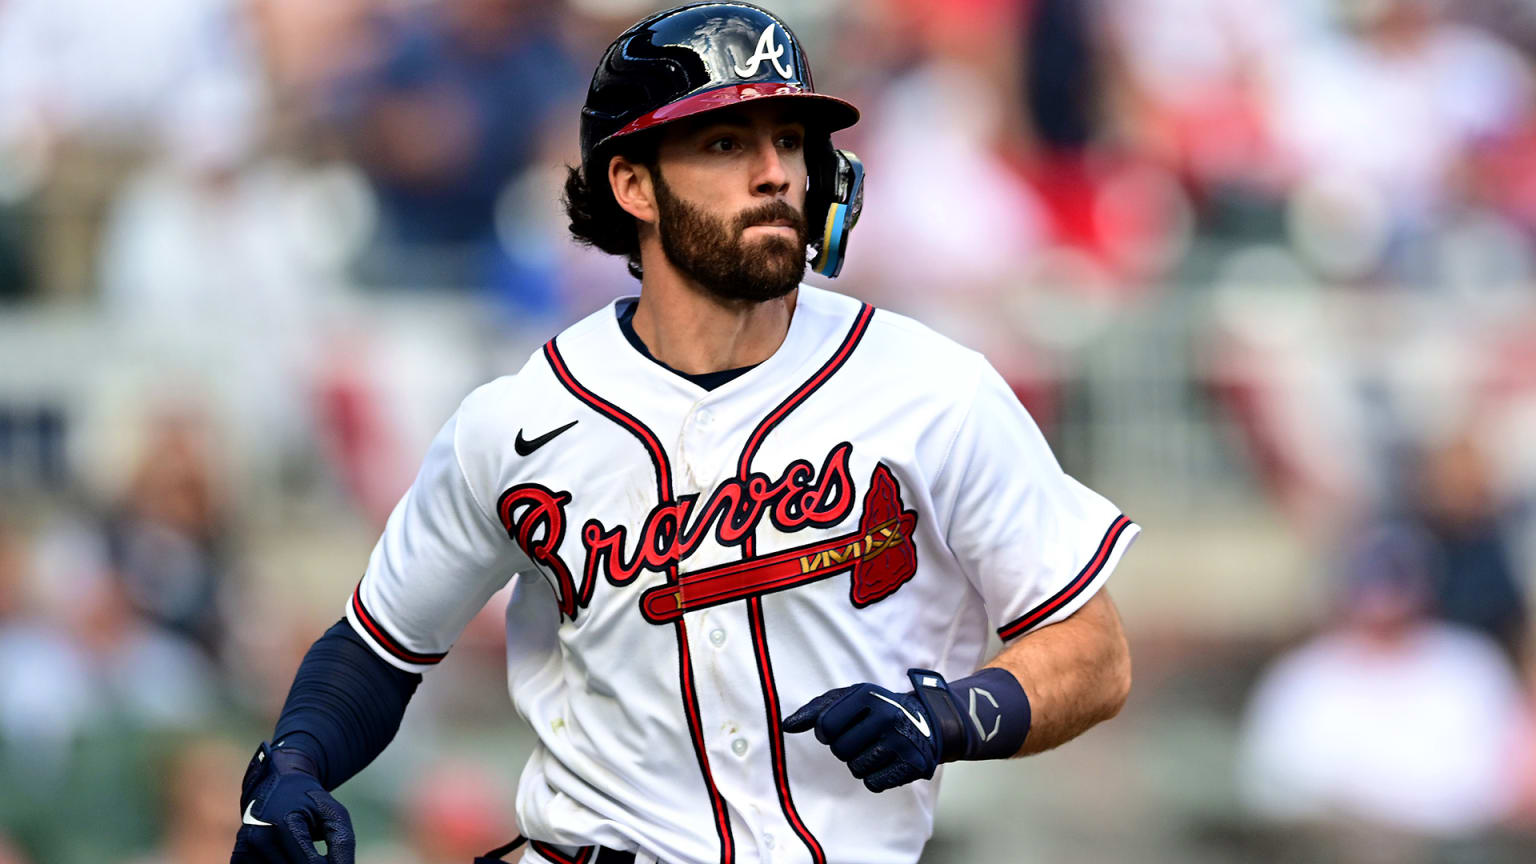 Free agent Dansby Swanson